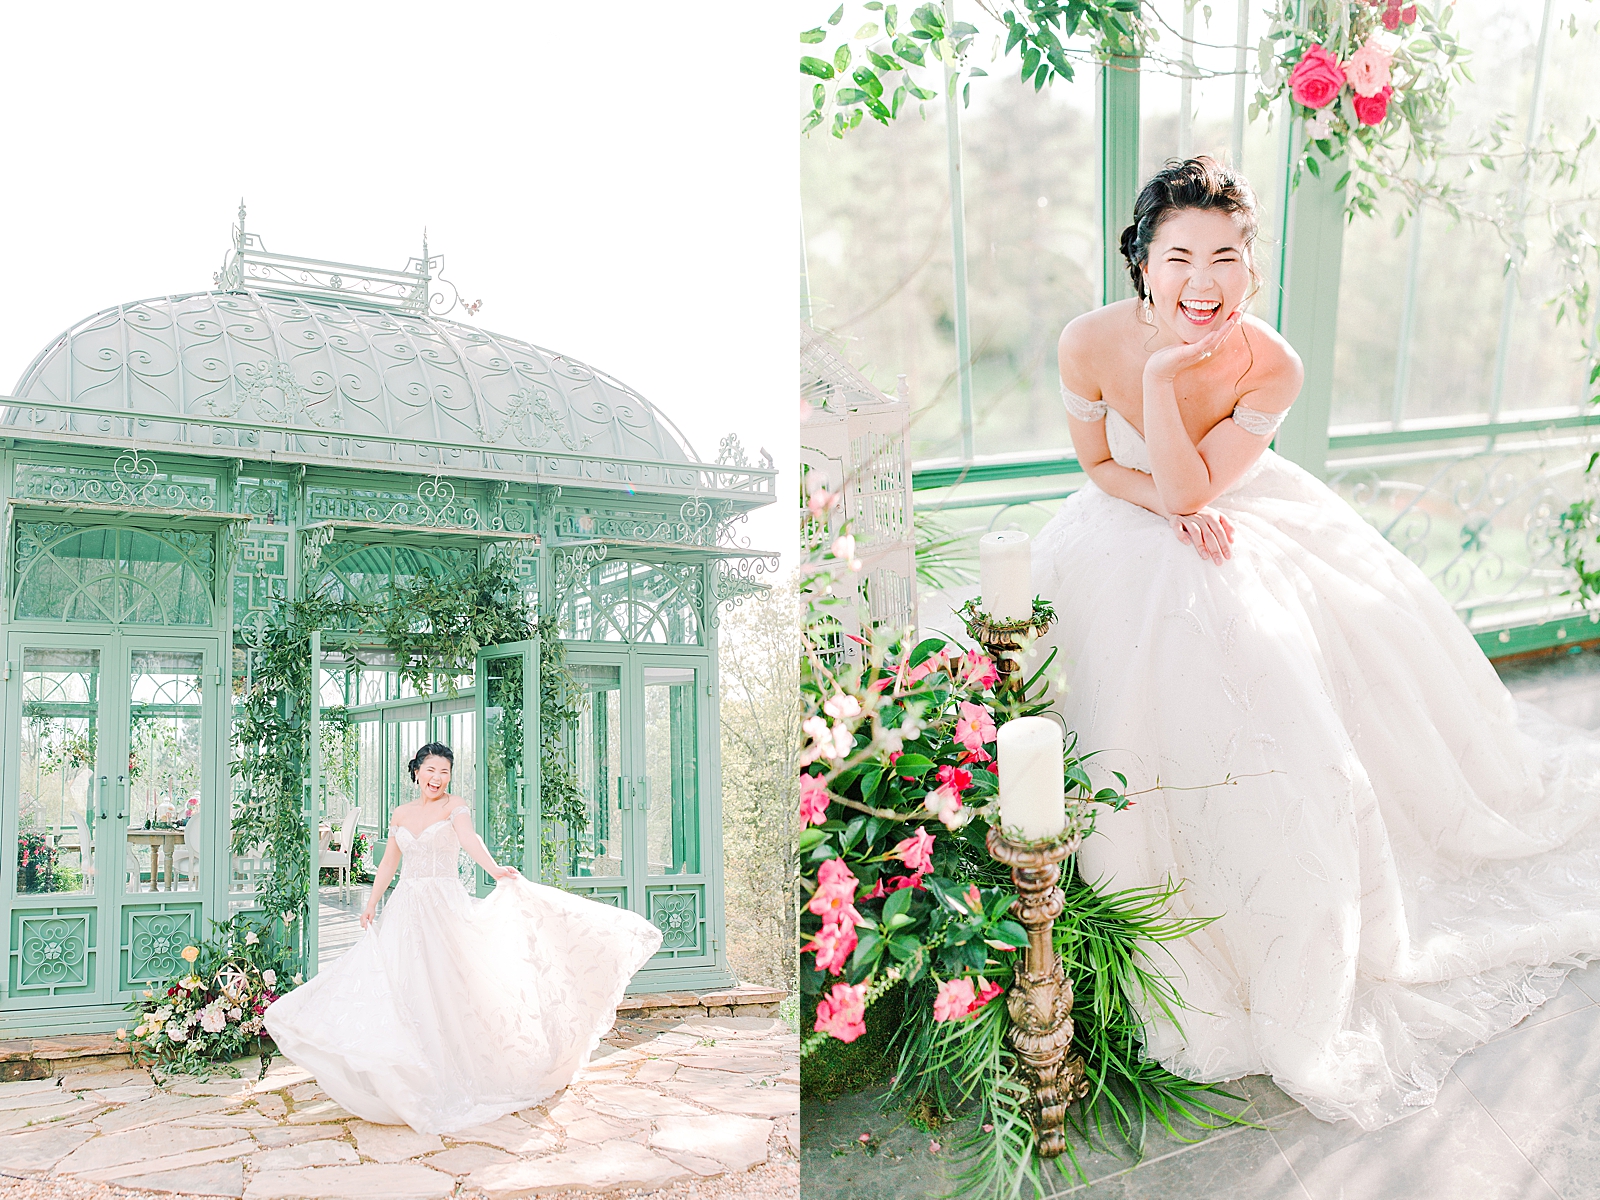 2400 On The River Bridal Session Lily twirling in front of Greenhouse and smiling sitting on bench Photos